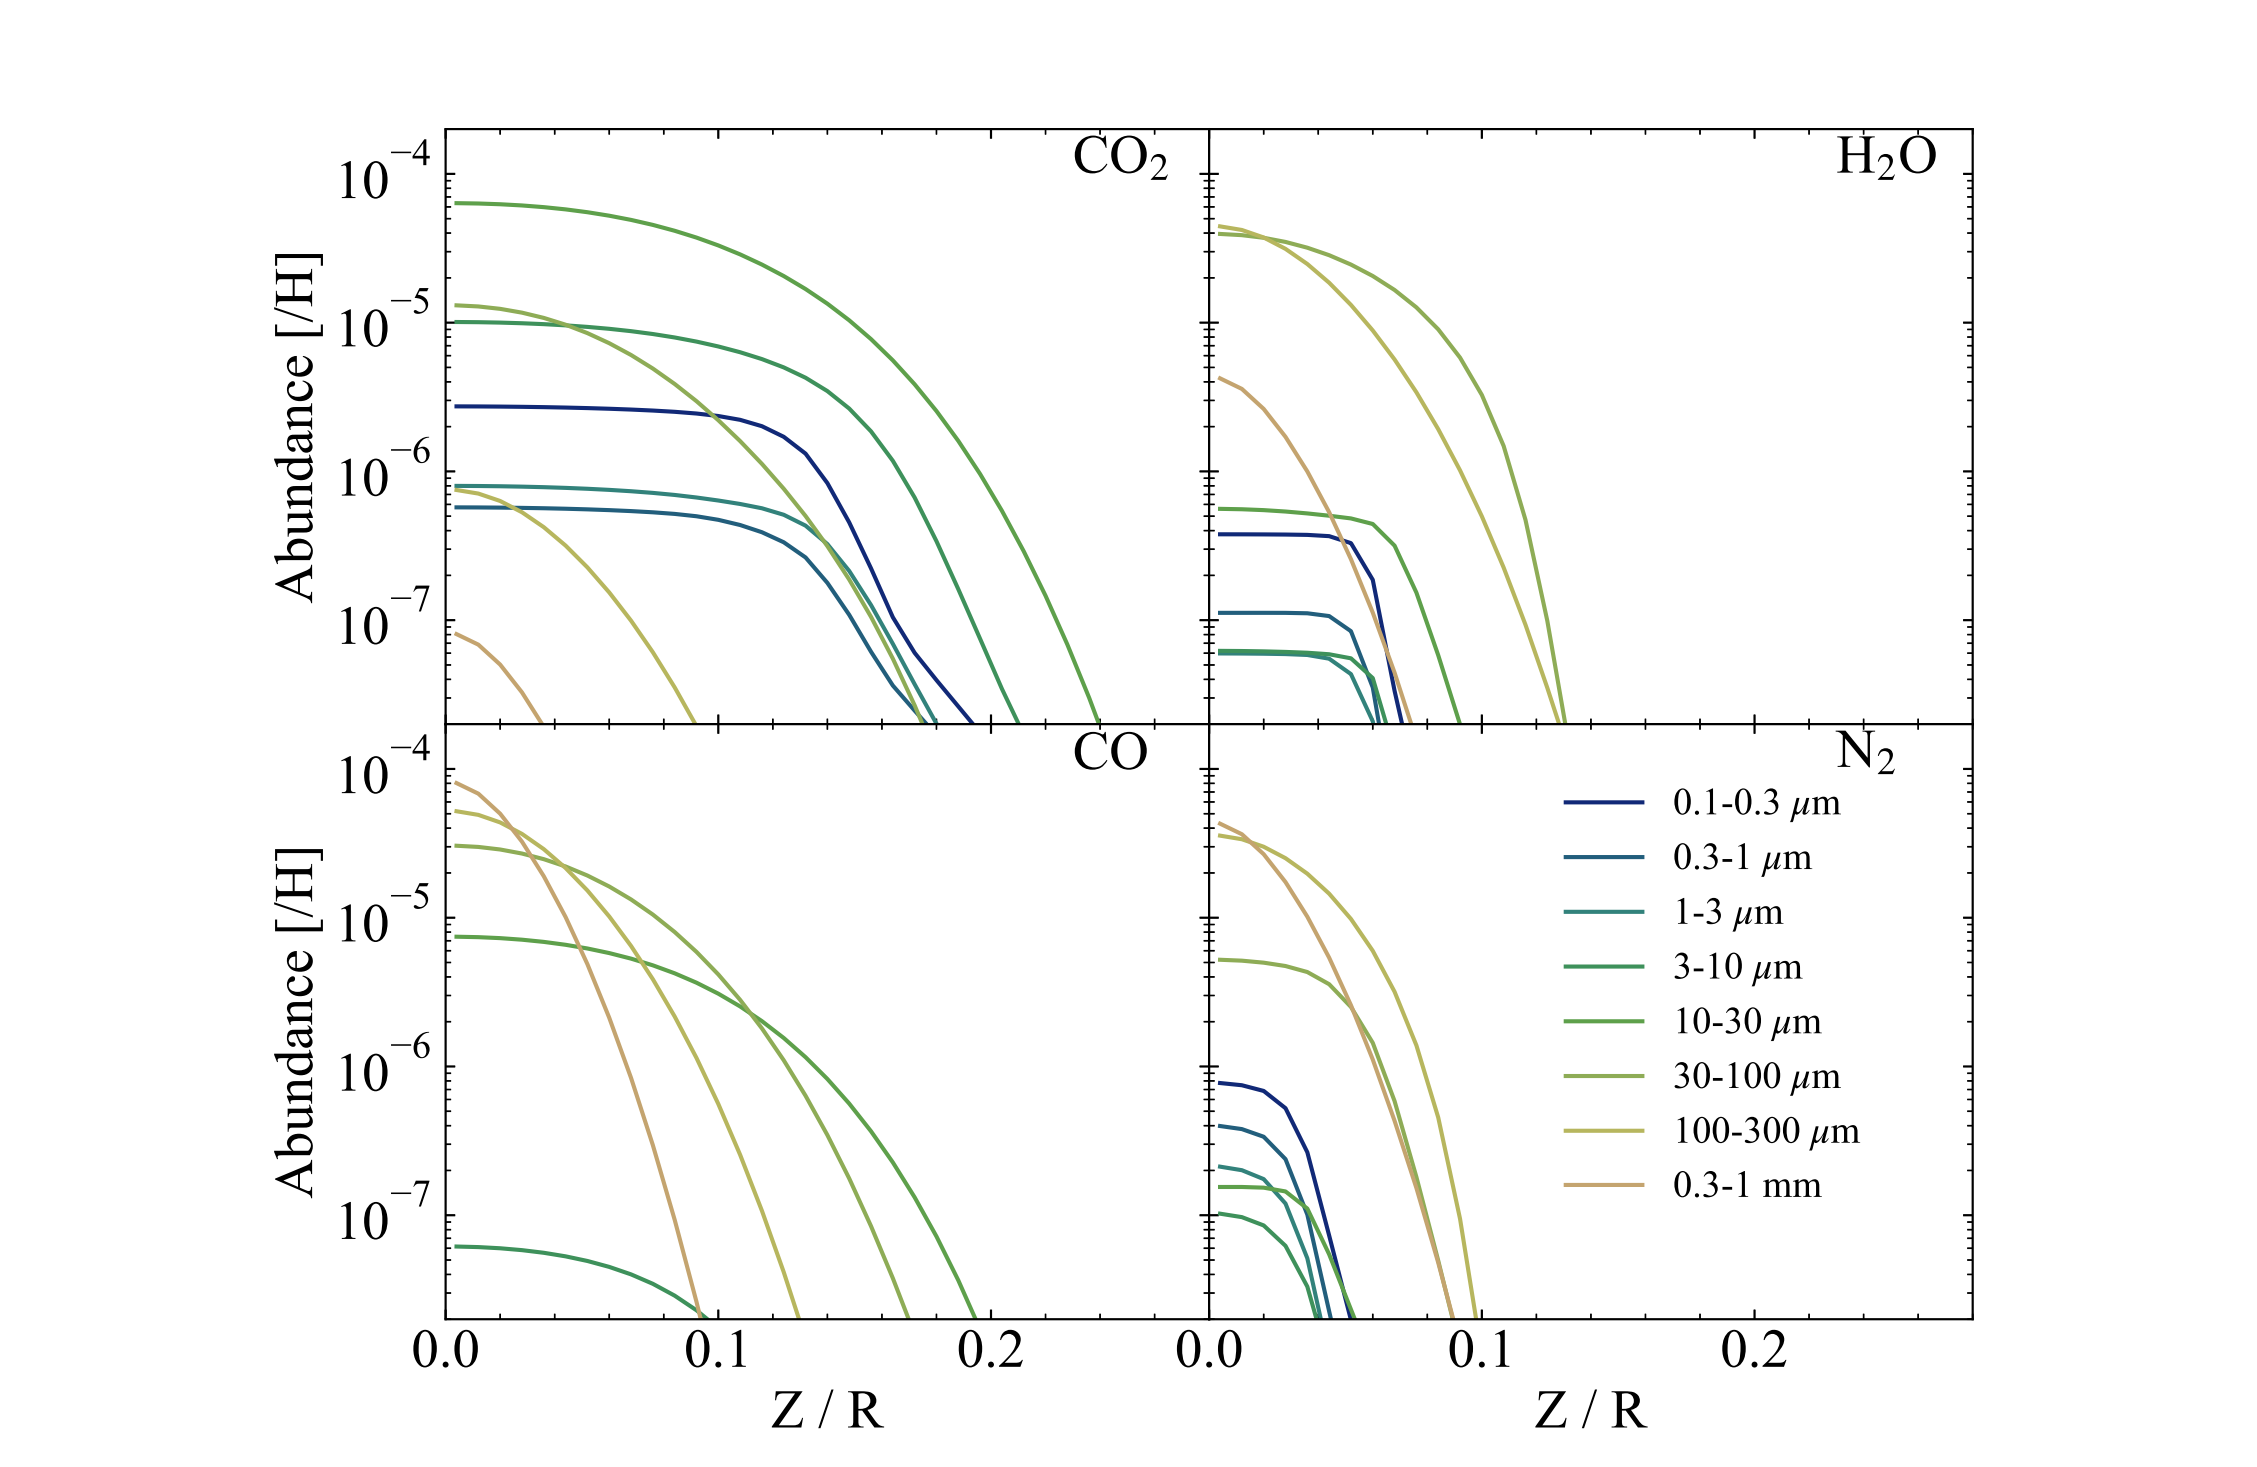 Different Degrees Of Nitrogen And Carbon Depletion In The Warm Molecular Layers Of Protoplanetary Disks